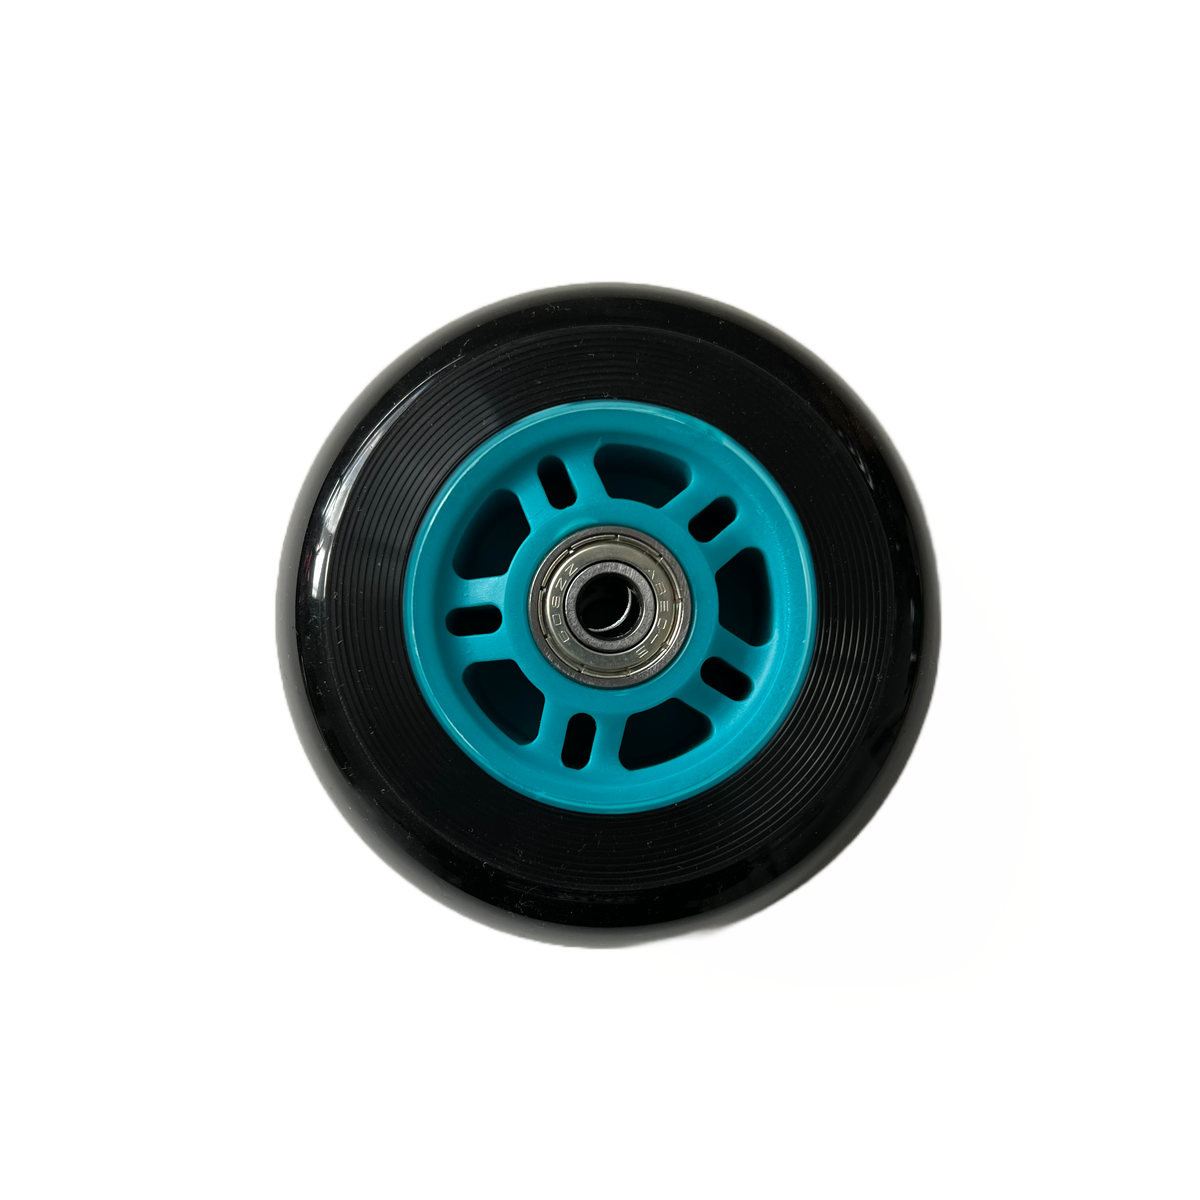 Svolta Ace Scooter Replacement Wheel Teal or Red